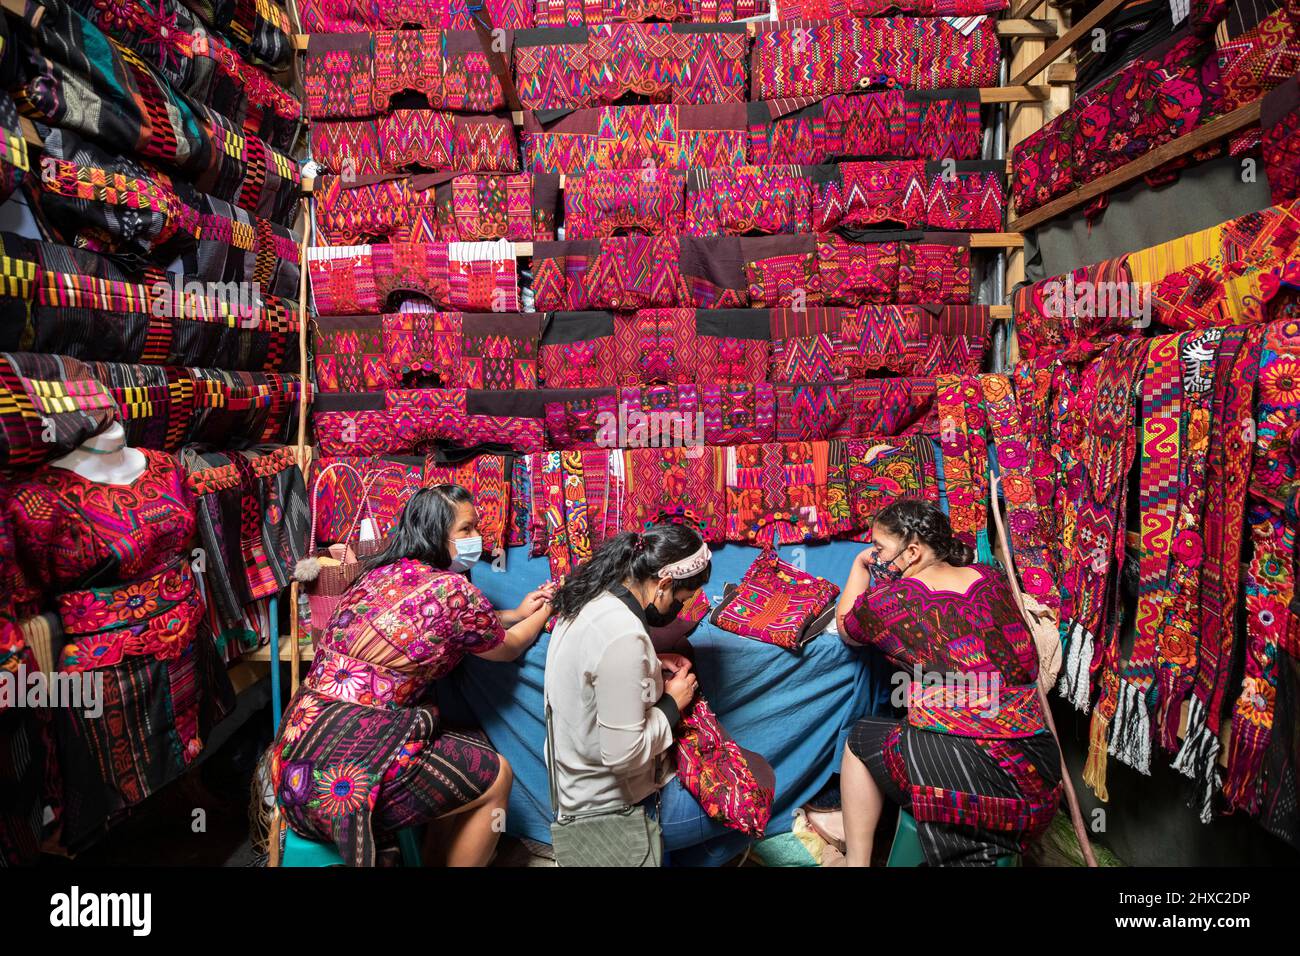 Dresses and fabric are for sale at the colorful weekly Chichicastenango Mayan Market in Guatemala, Central America. Stock Photo